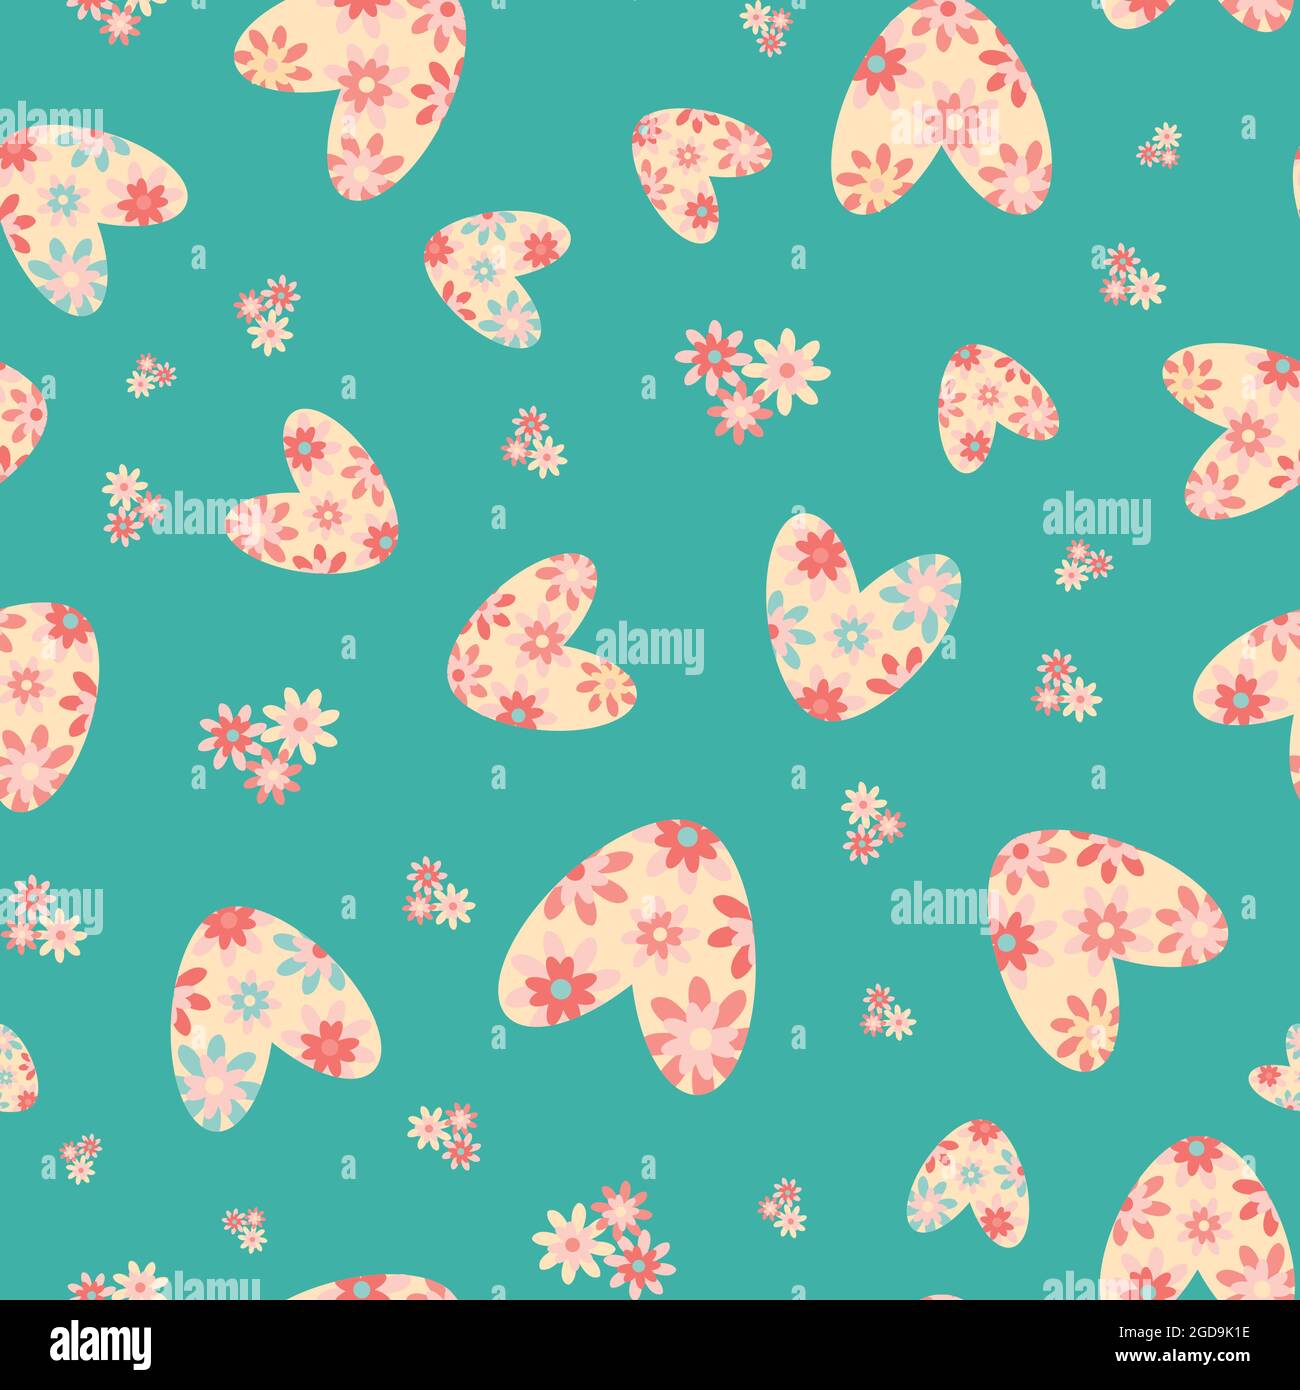 Colorful love heart vector seamless pattern in boho style. Aqua blue pink retro floral hearts and flowers backdrop. Scattered folk art bohemian Stock Vector